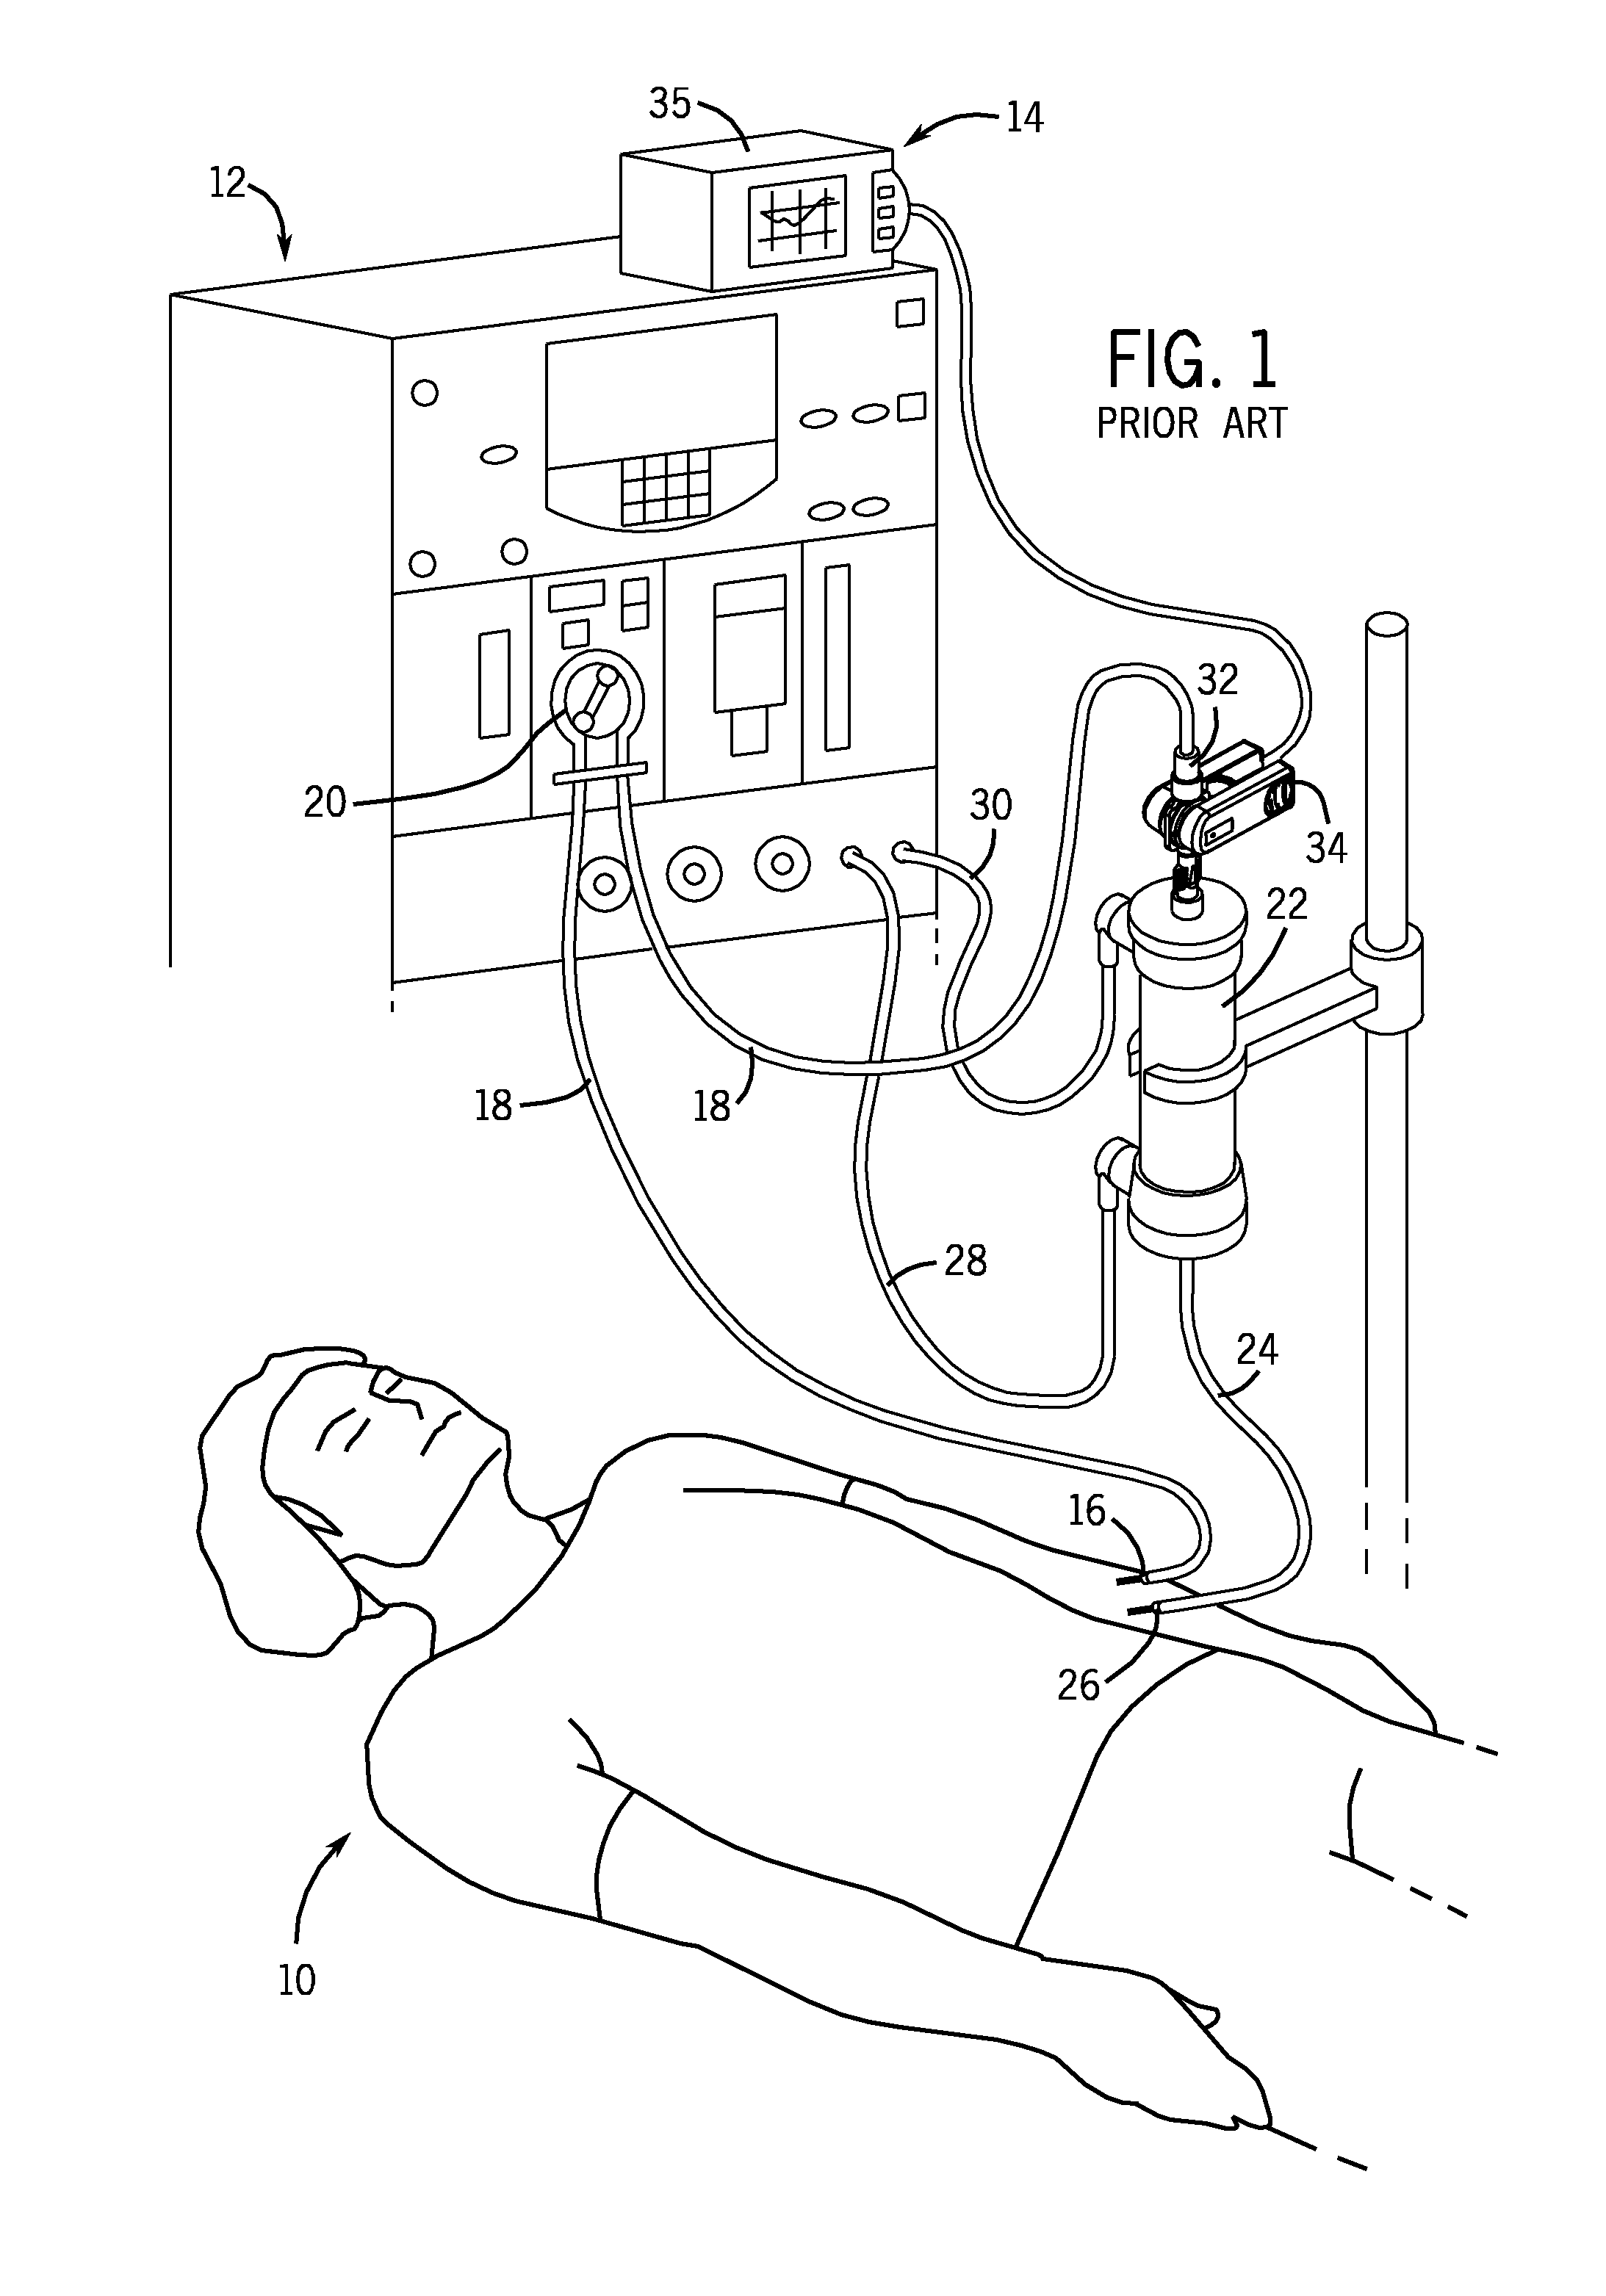 Blood Chamber for an Optical Blood Monitoring System